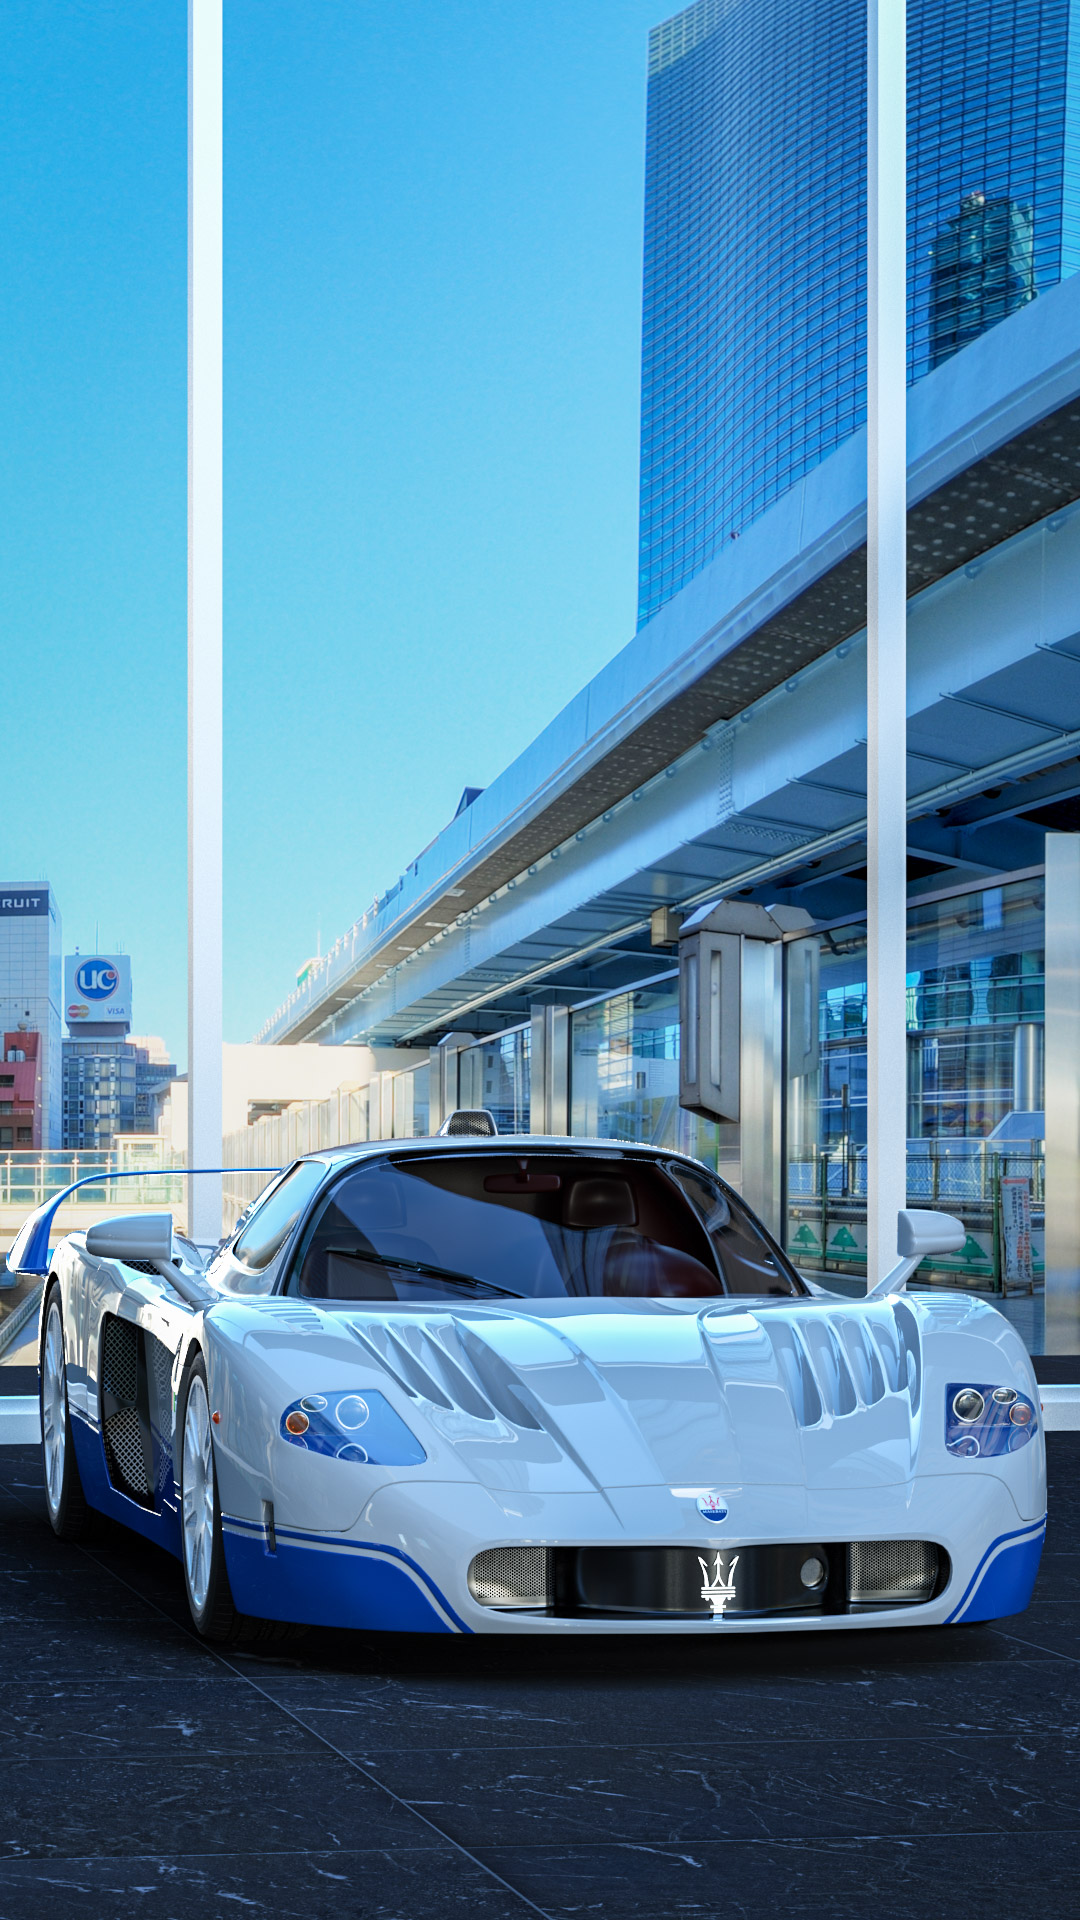 Unveil the elegance of the Maserati MC12 with our car wallpaper for iPhone, a testament to Italian craftsmanship and style.